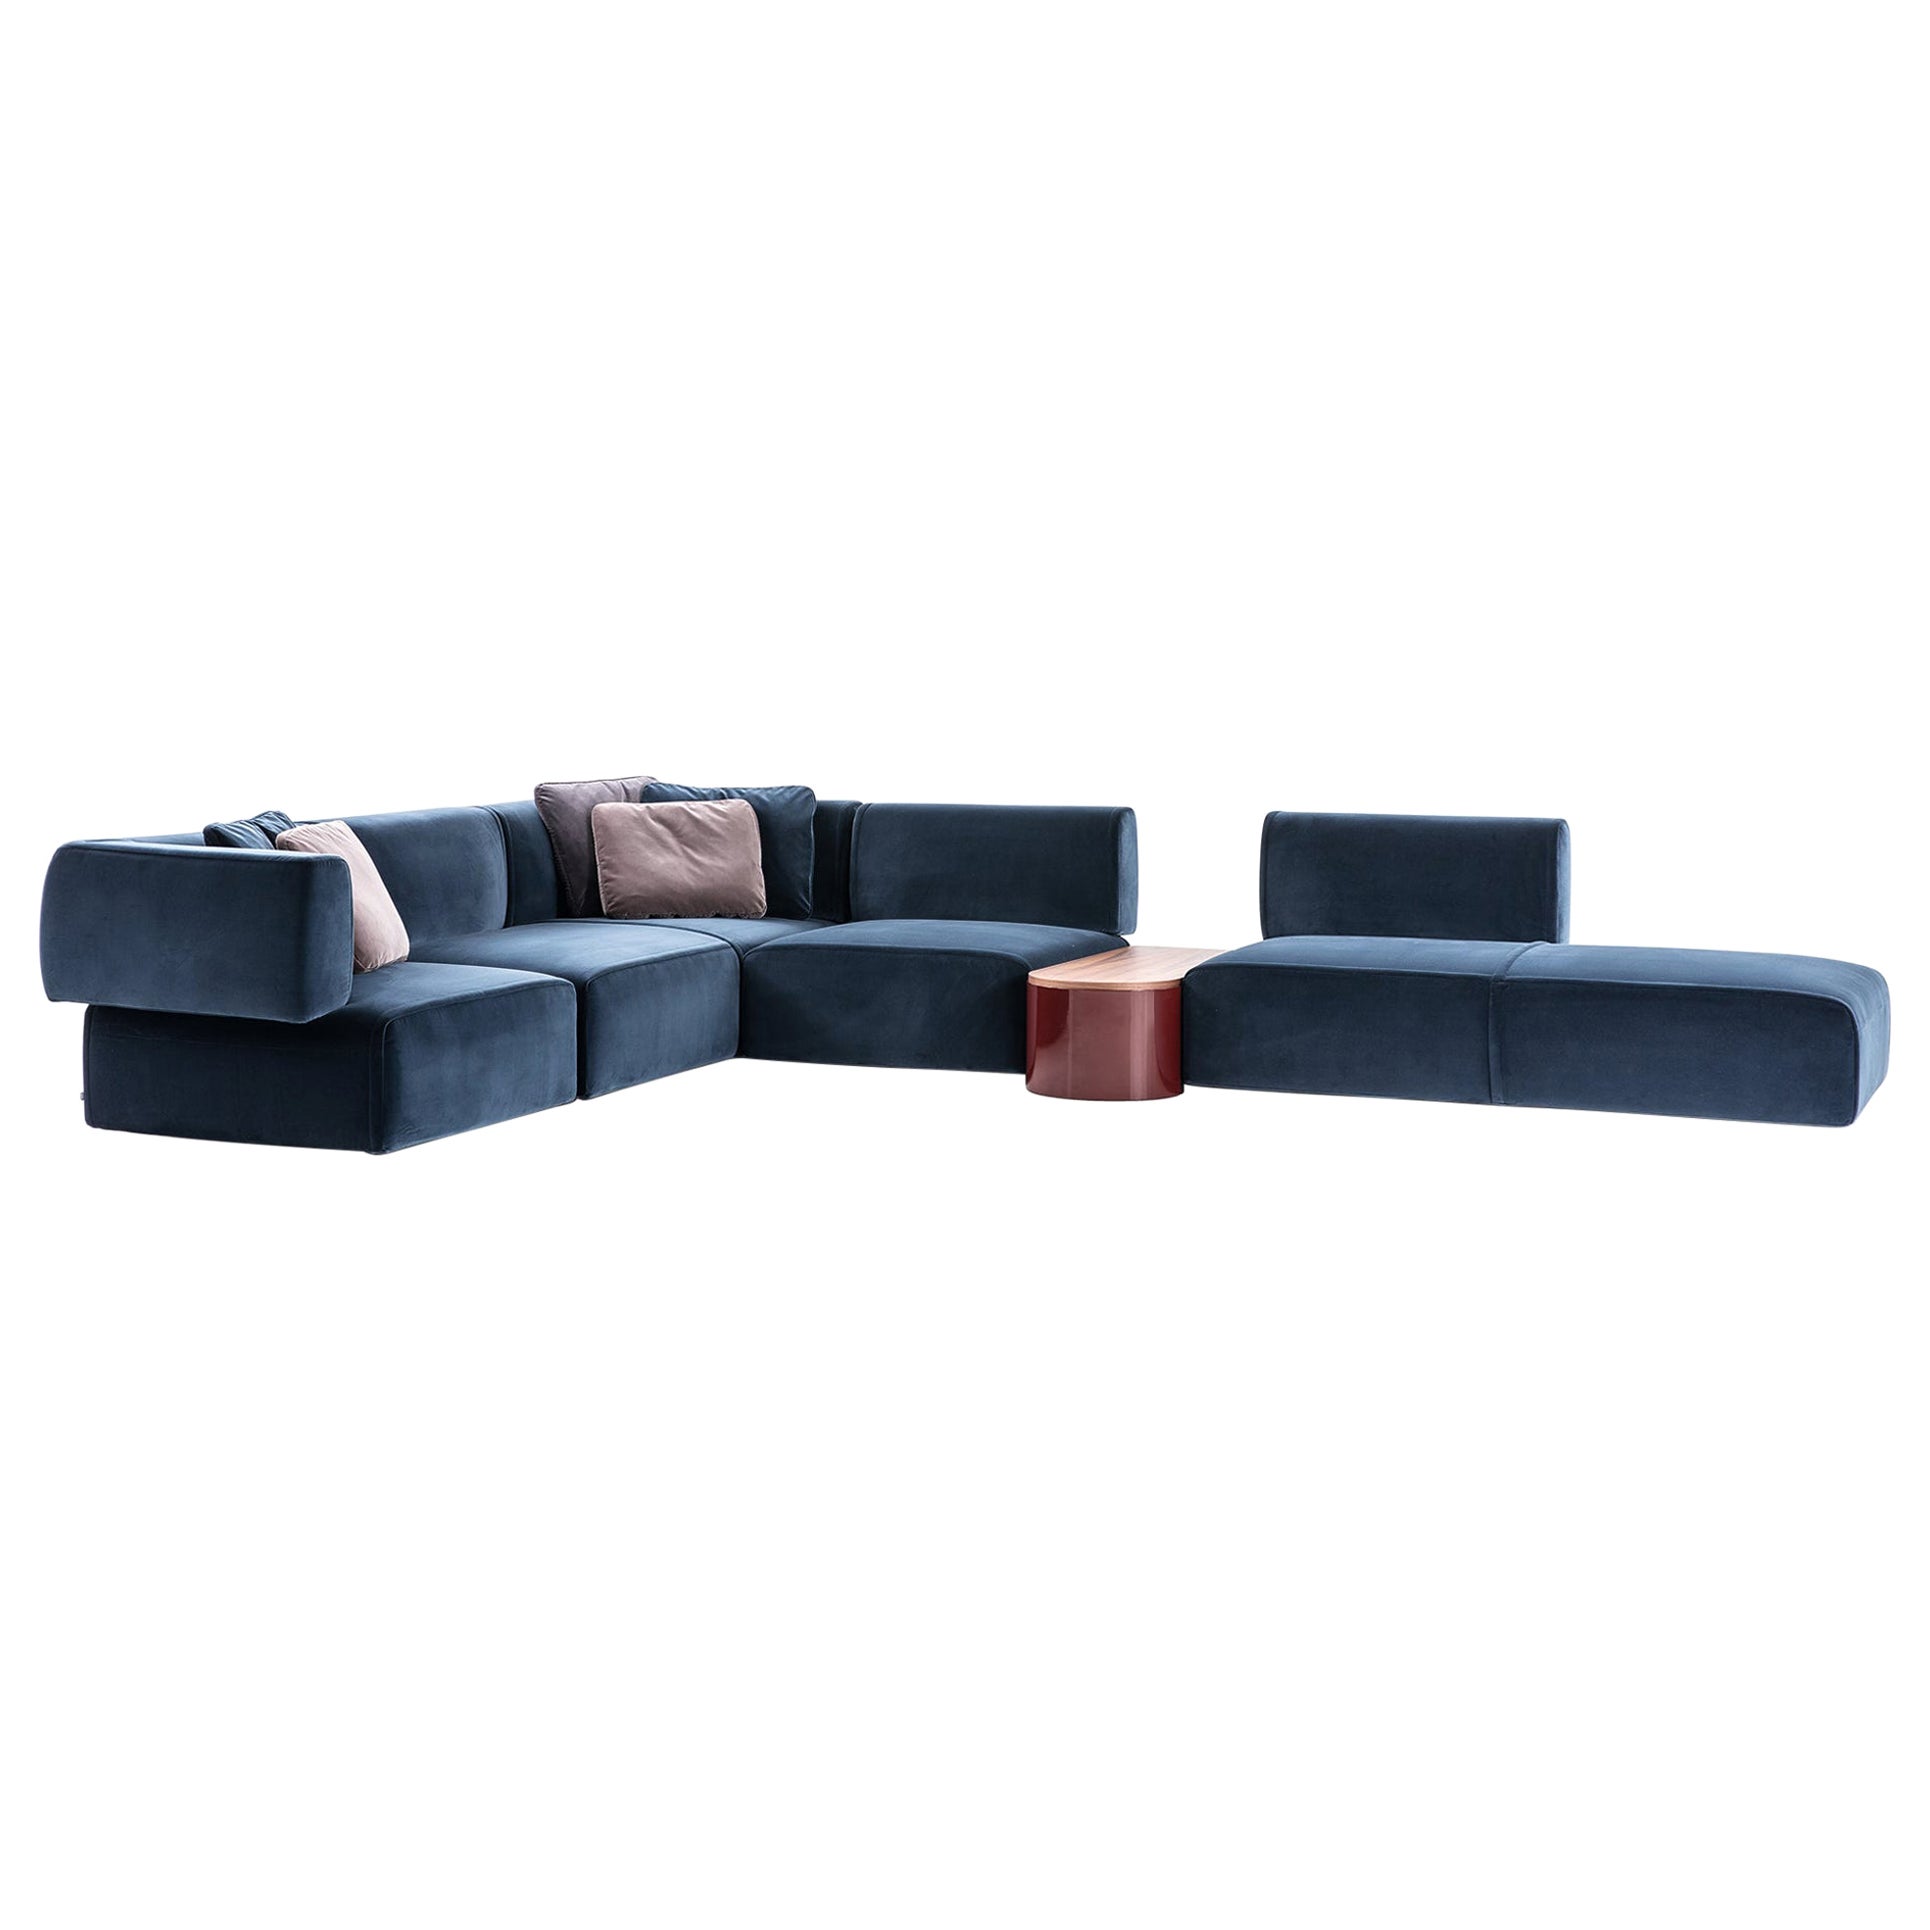 Patricia Urquiola 'Bowy' Modular Sofa with Low Table, Foam and Fabric by Cassina